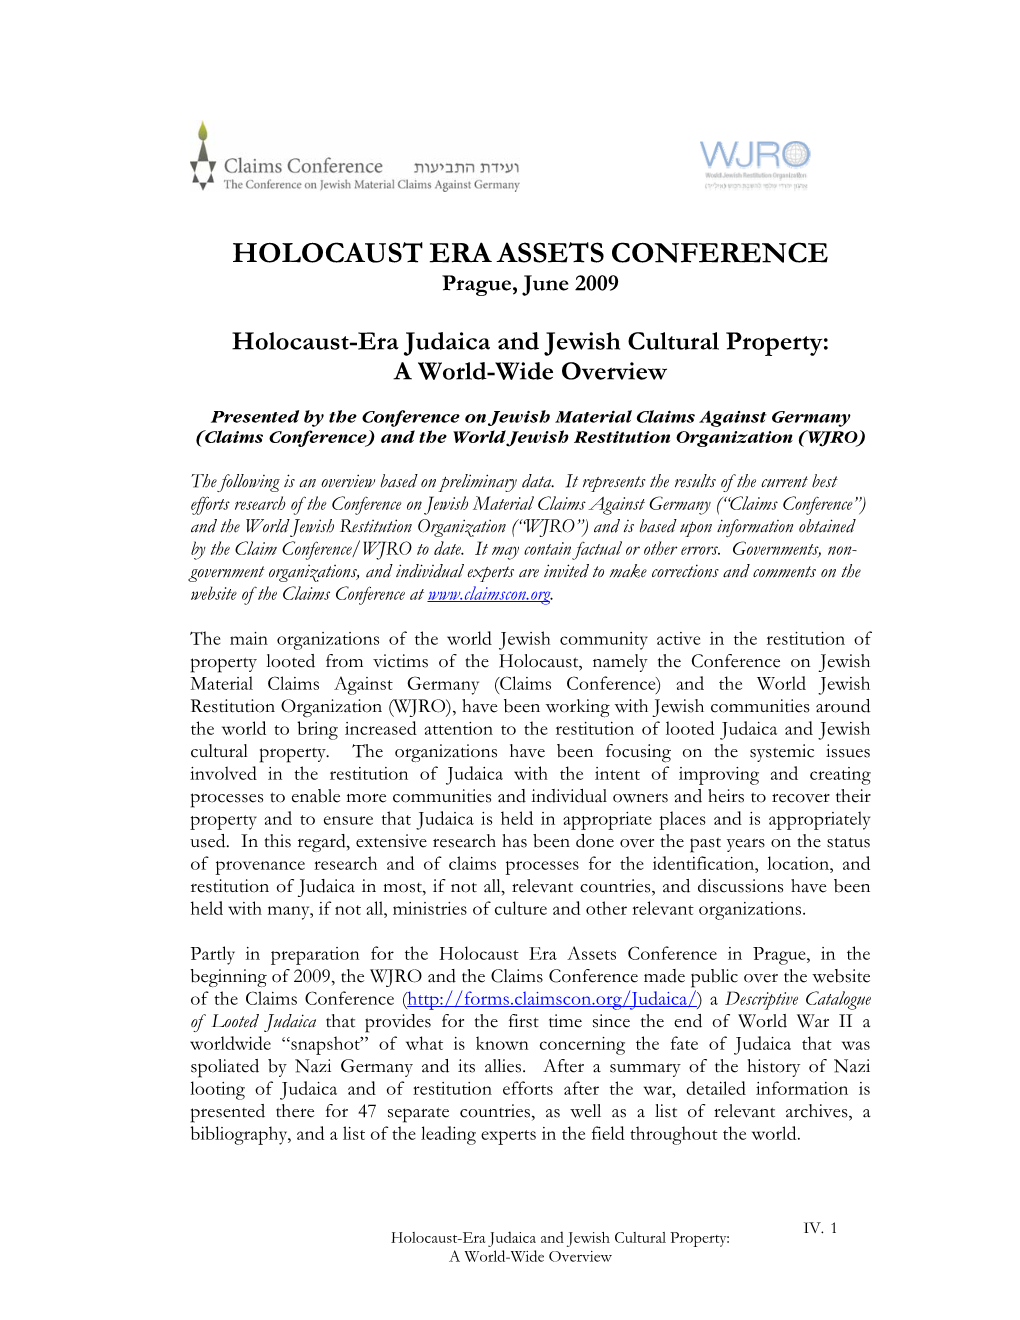 Holocaust-Era Judaica and Jewish Cultural Property: a World-Wide Overview